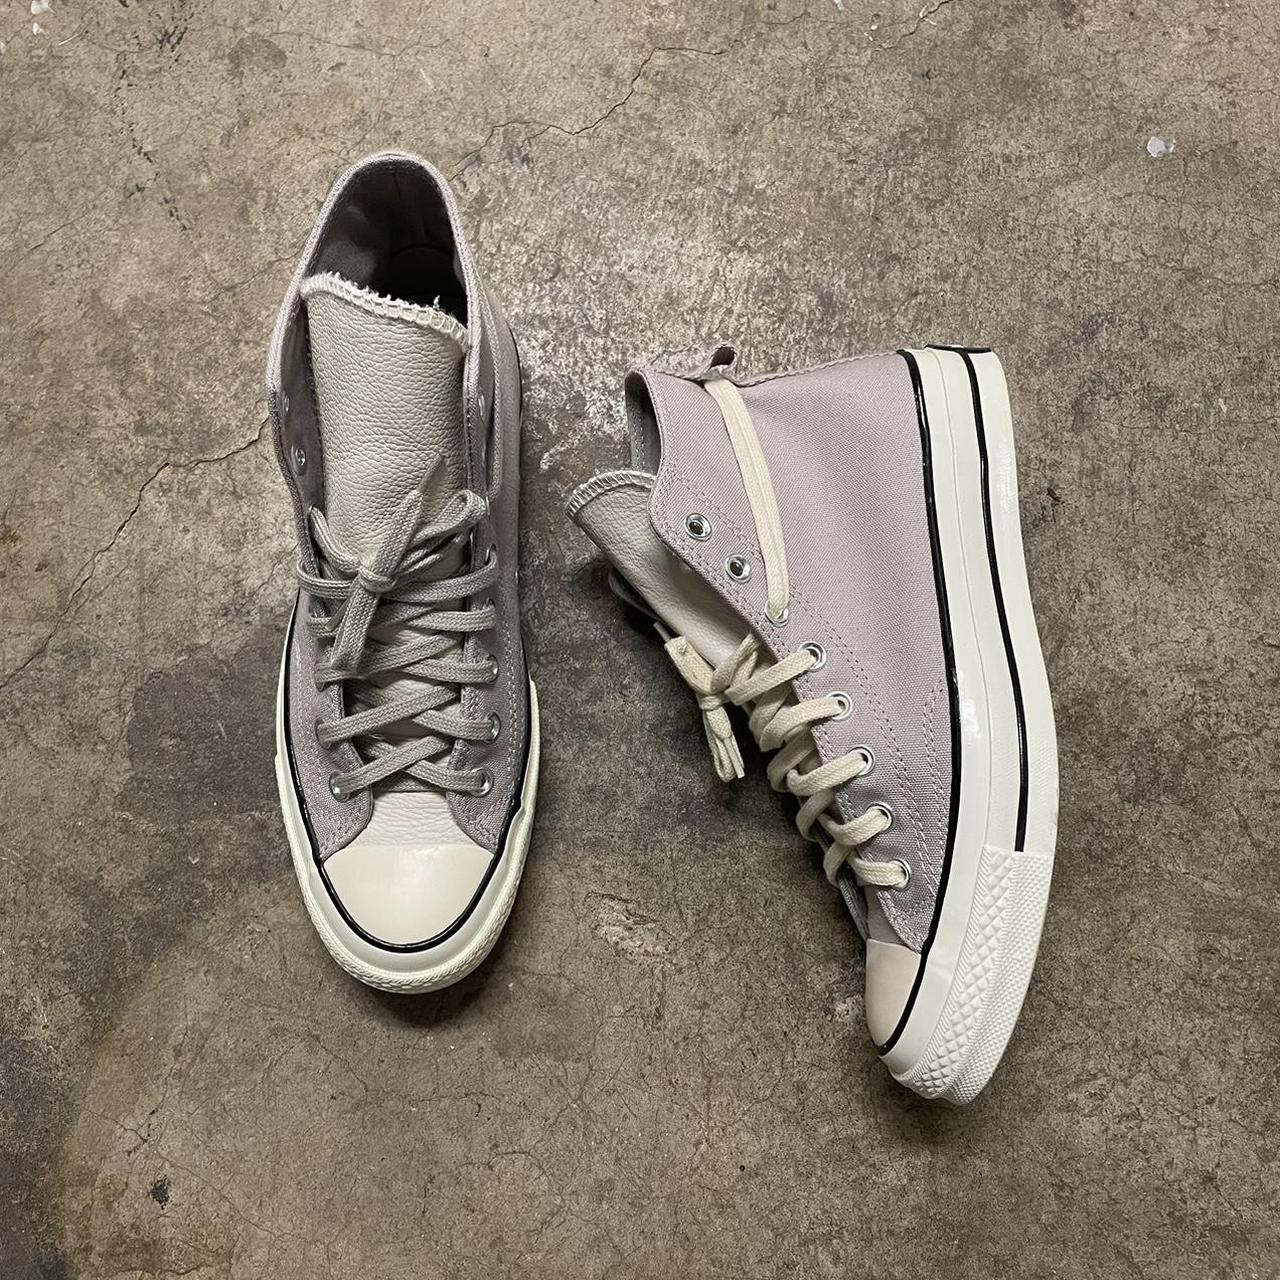 Fear of God Men's White and Grey Trainers (2)